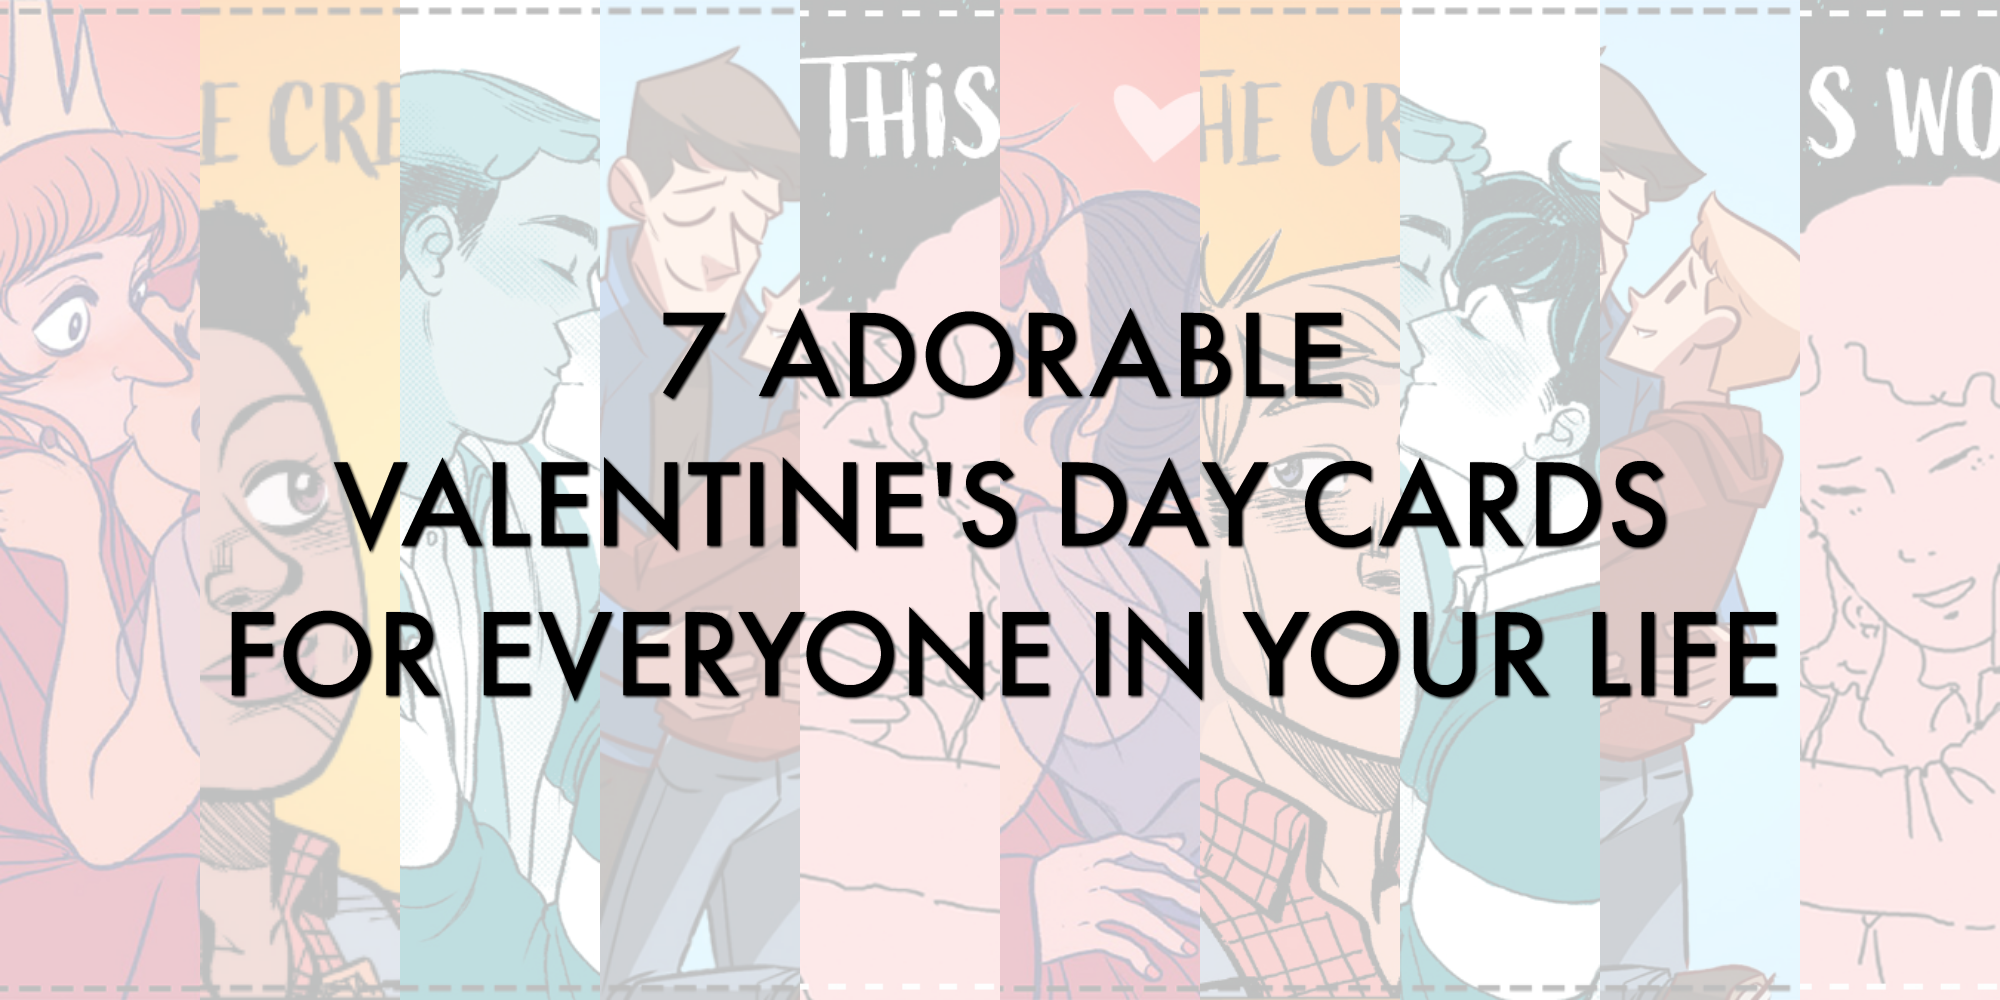 7 Adorable Valentine’s Day Cards for Everyone in Your Life